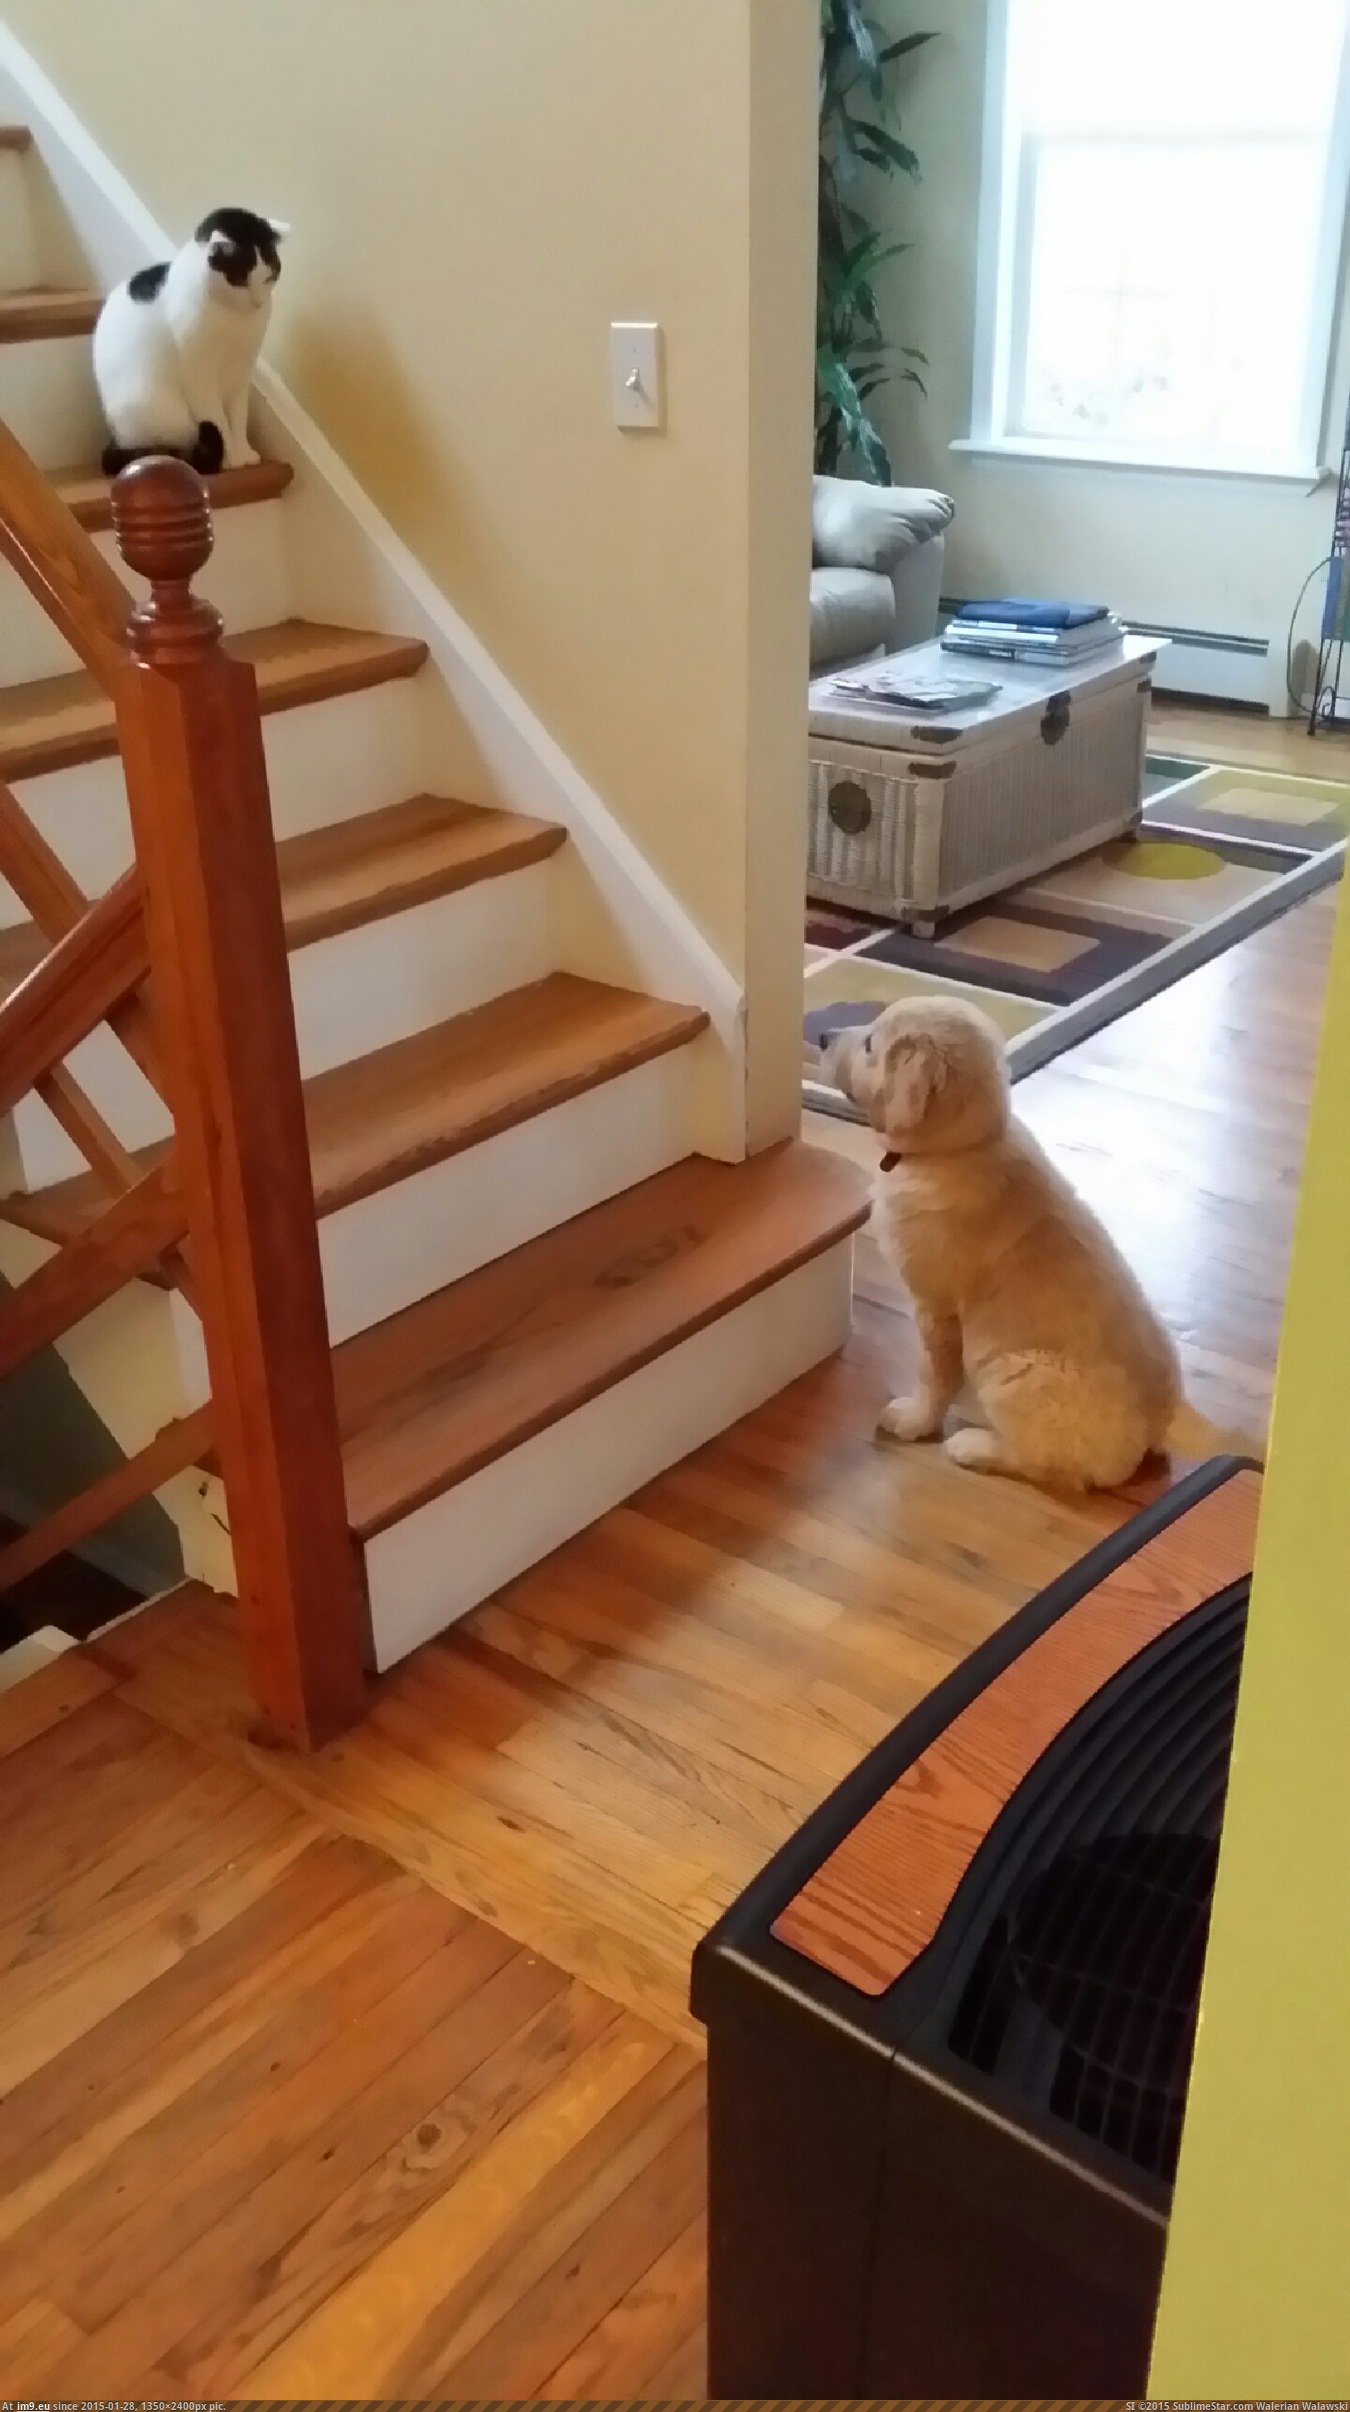 [Aww] We got a new puppy. The cat is skeptical (in My r/AWW favs)